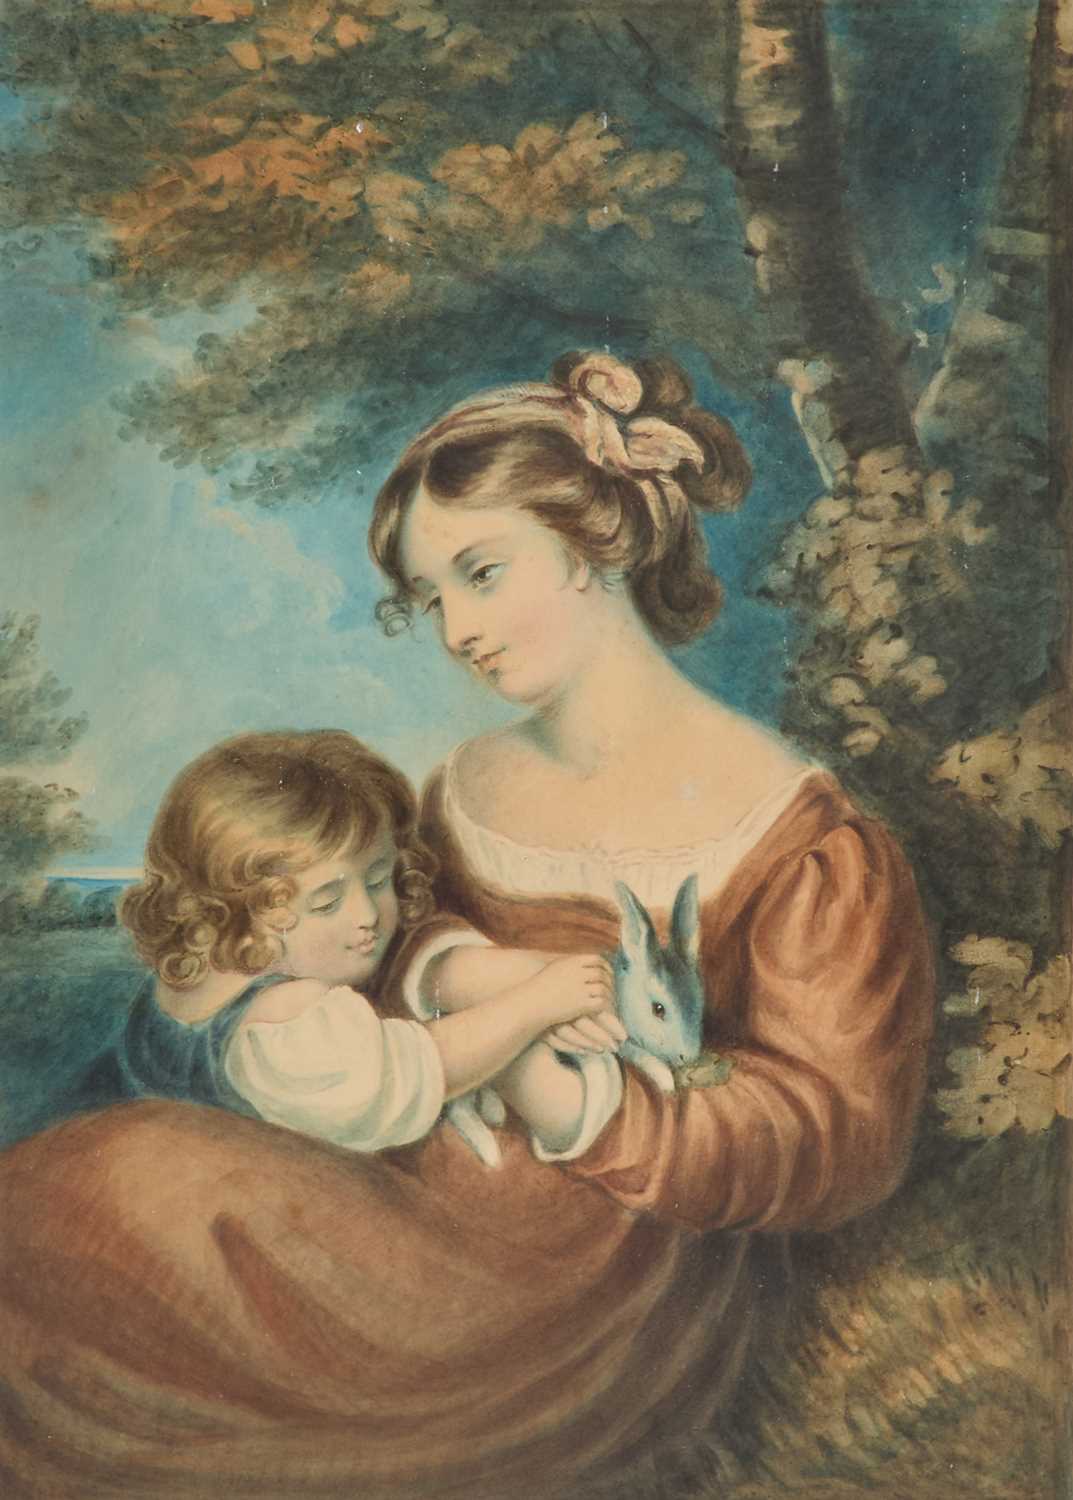 19TH CENTURY ENGLISH SCHOOL MOTHER AND CHILD HOLDING A RABBIT